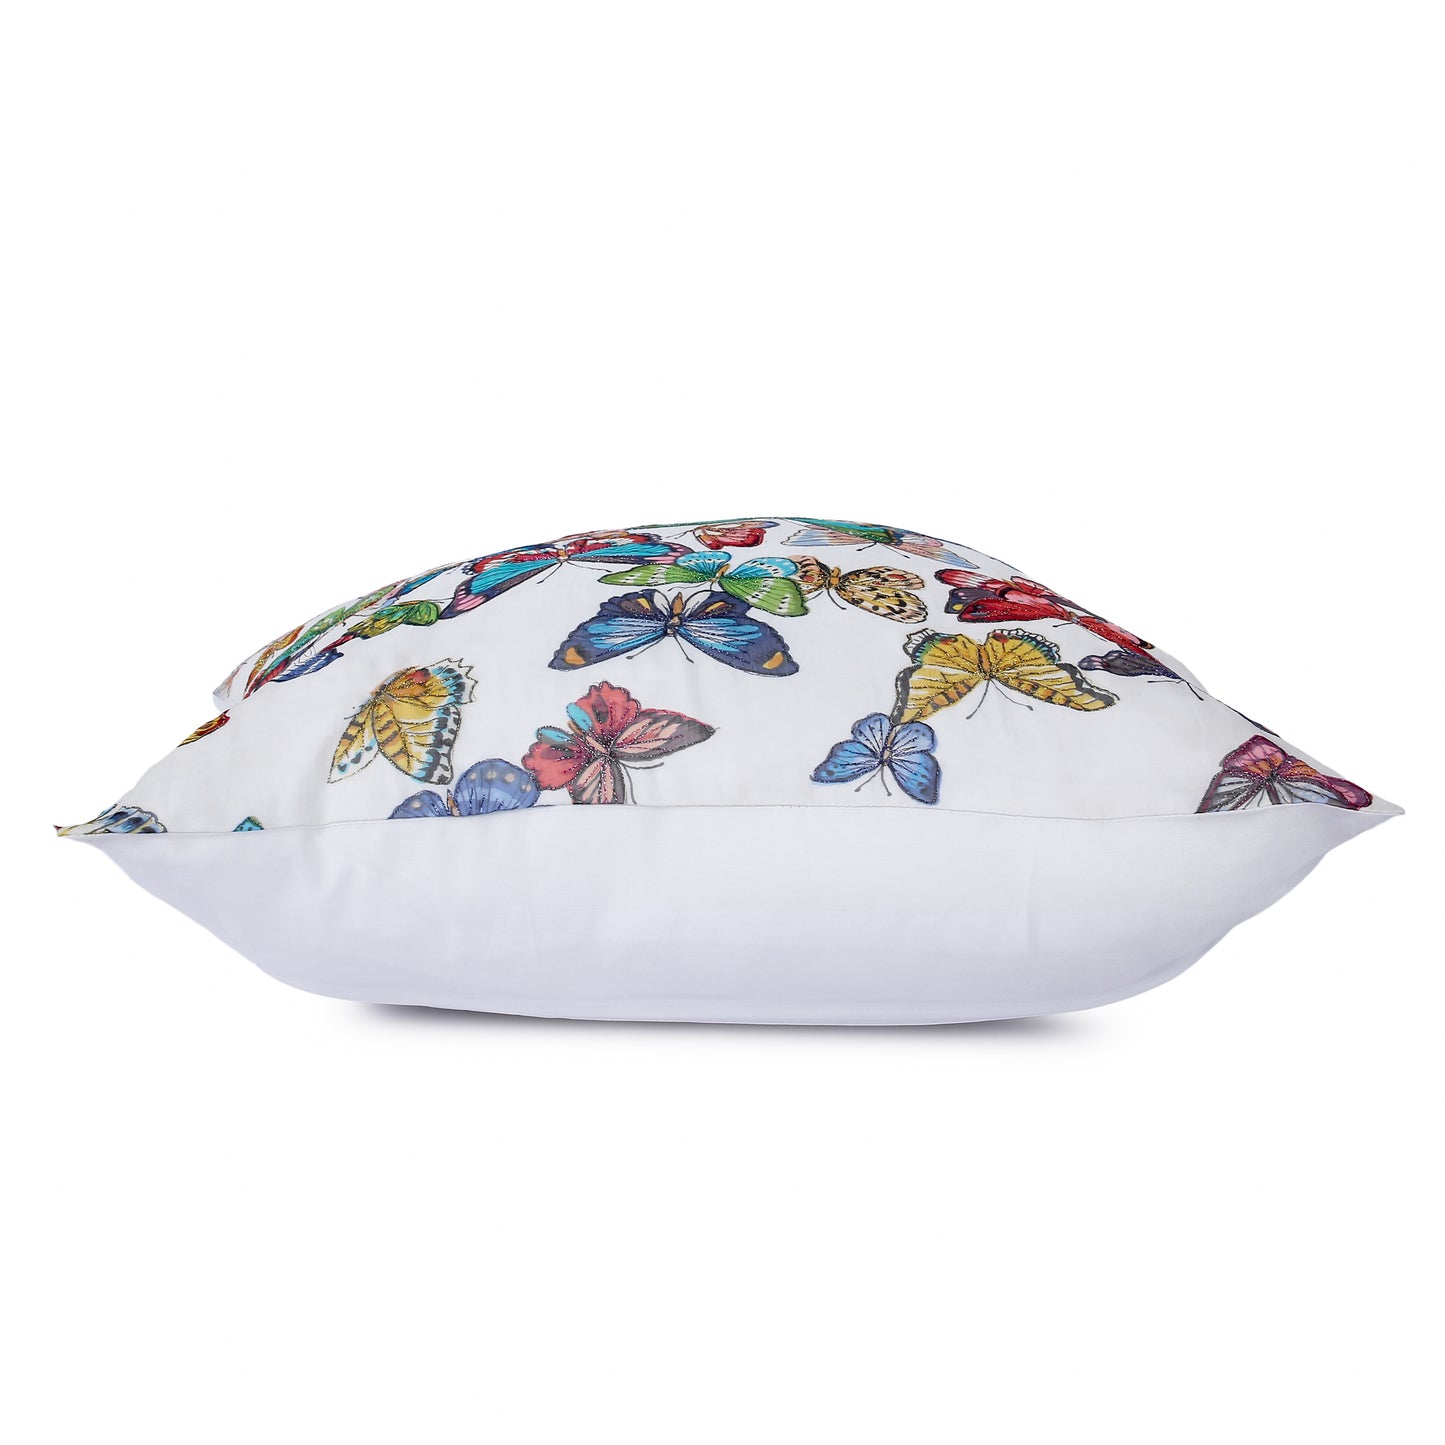 Butterfly Bliss Digital print Sparkling pillow cover